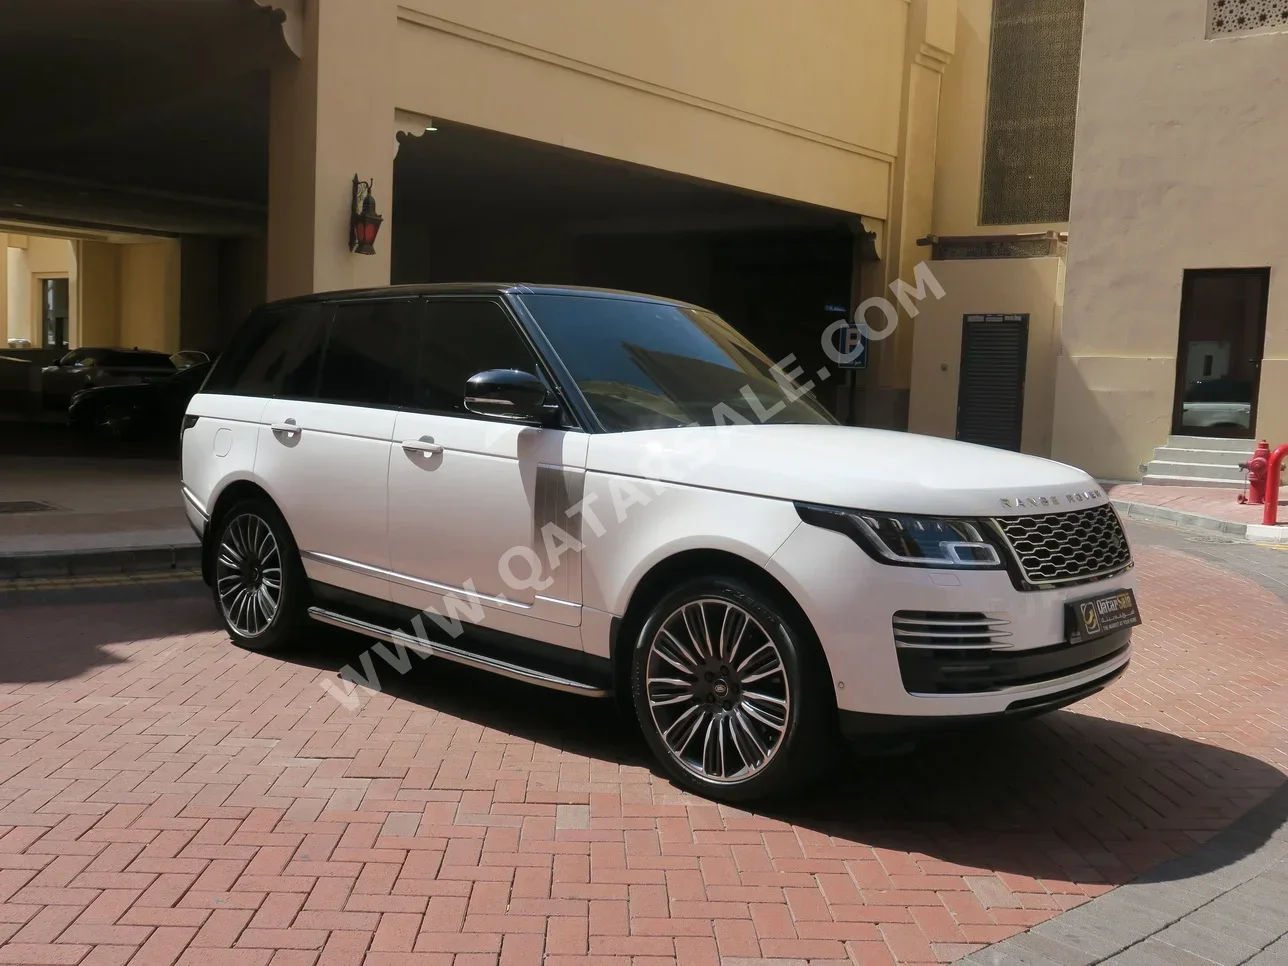 Land Rover  Range Rover  Vogue  Autobiography  2019  Automatic  45,000 Km  8 Cylinder  Four Wheel Drive (4WD)  SUV  White  With Warranty